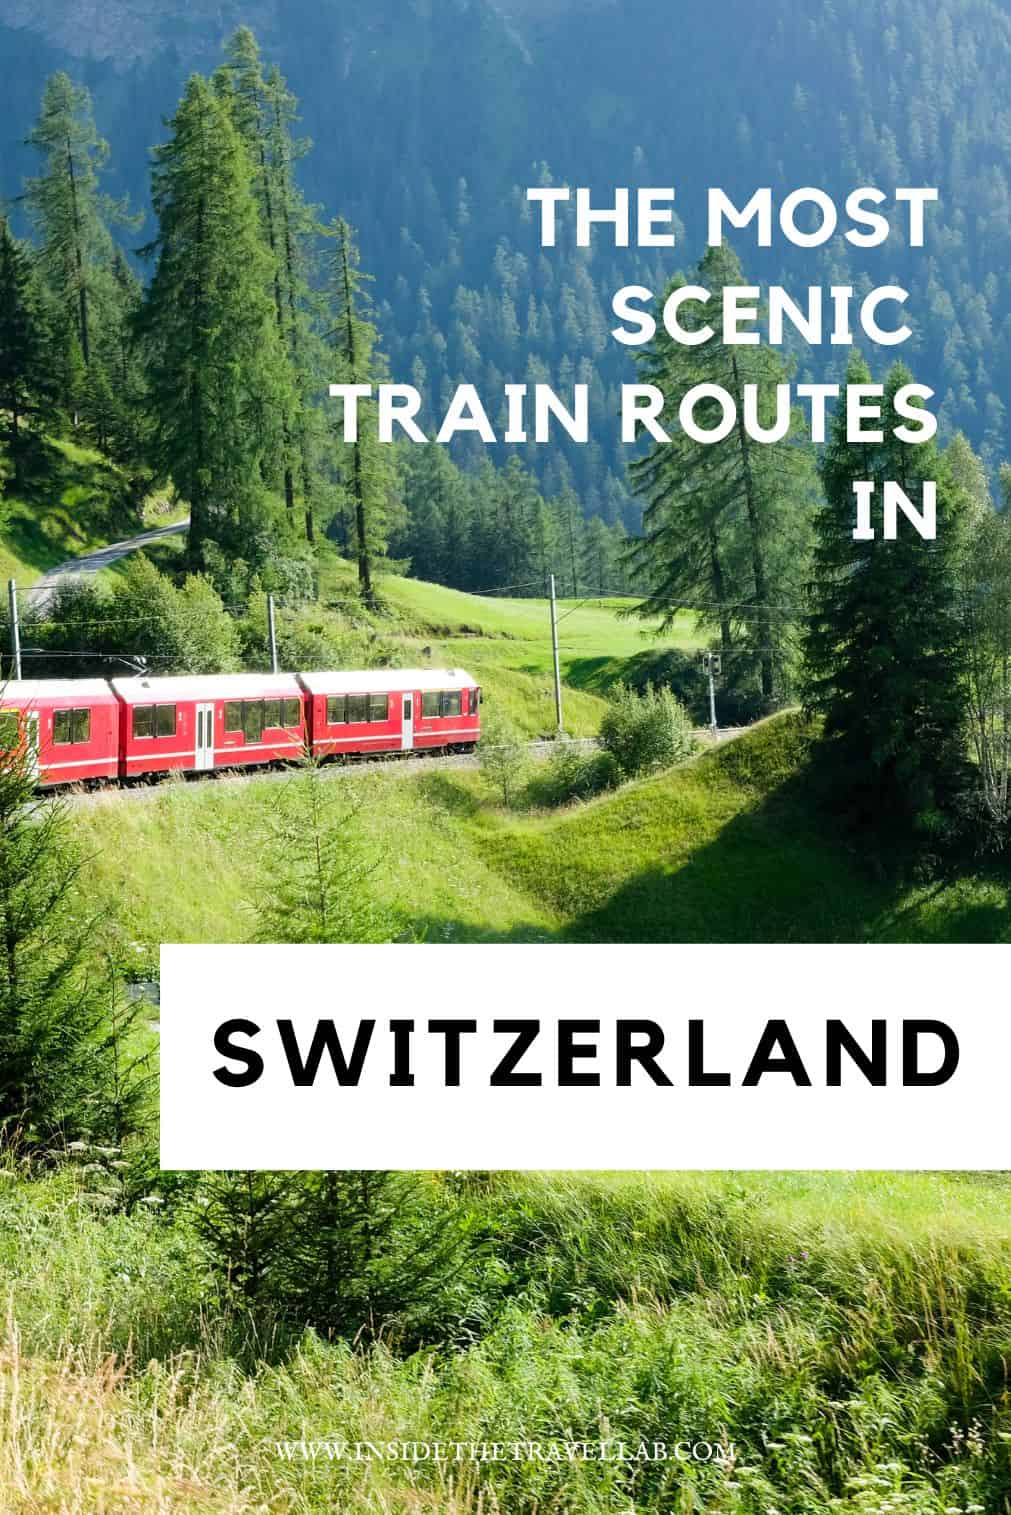 The most scenic train routes in Switzerland cover image